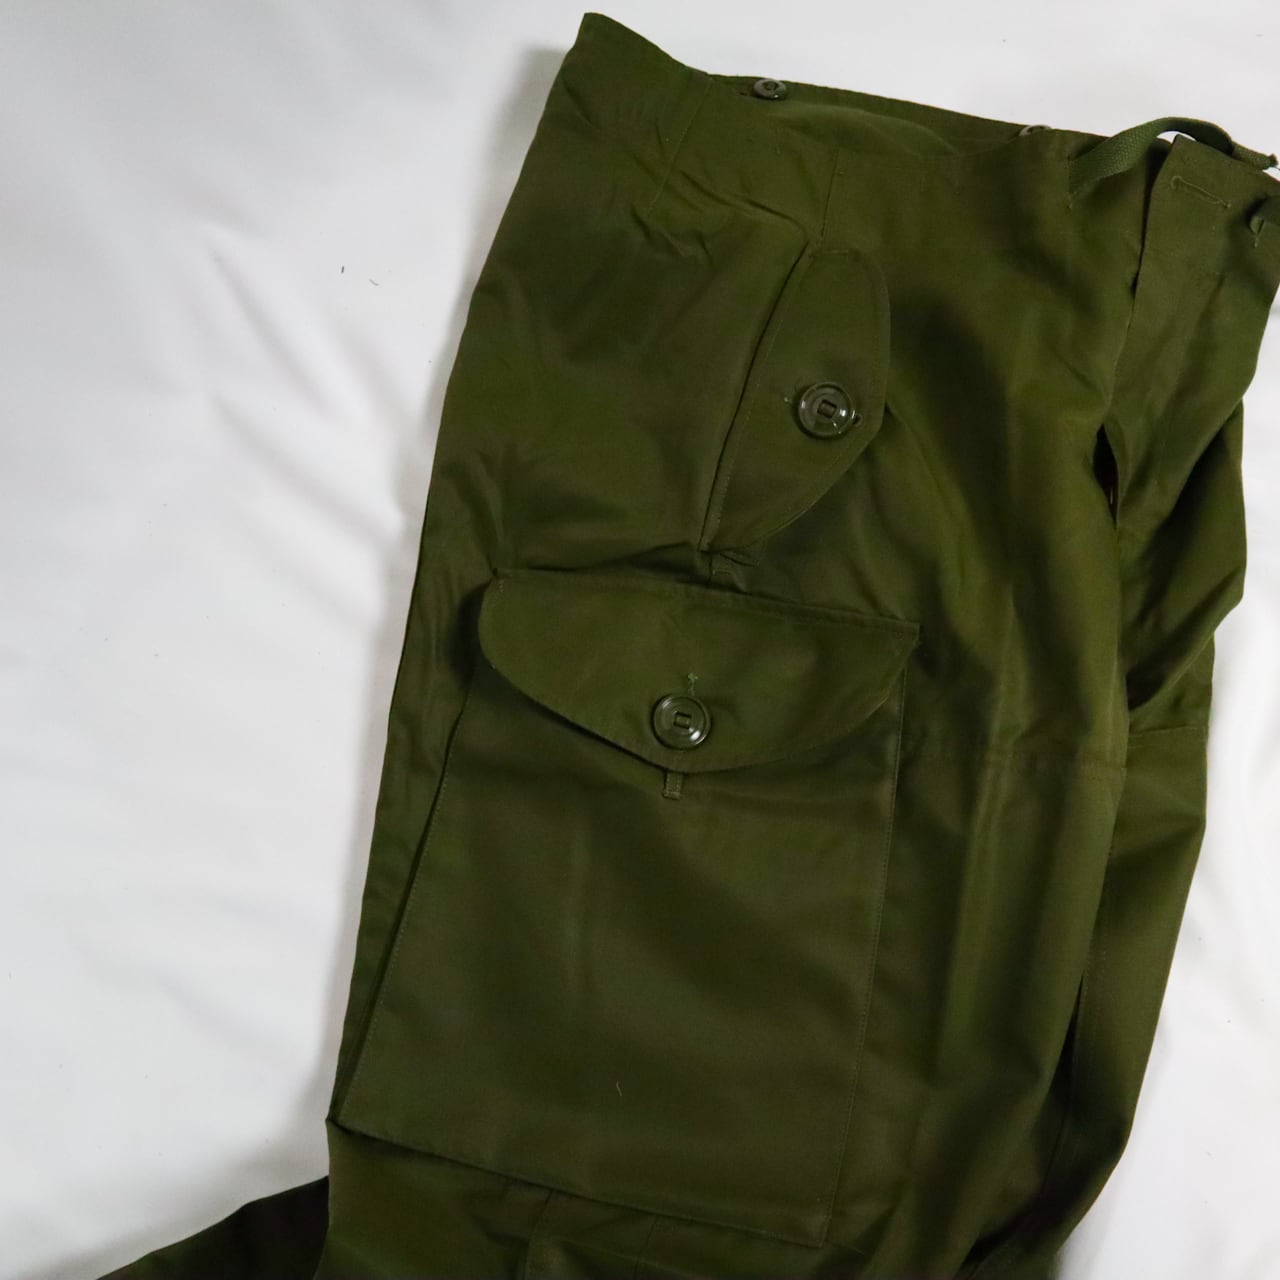 DEADSTOCK】CANADIAN ARMY ECW WINDPROOF OVER PANTS カナダ軍 オーバーパンツ カーゴ | CADAL8